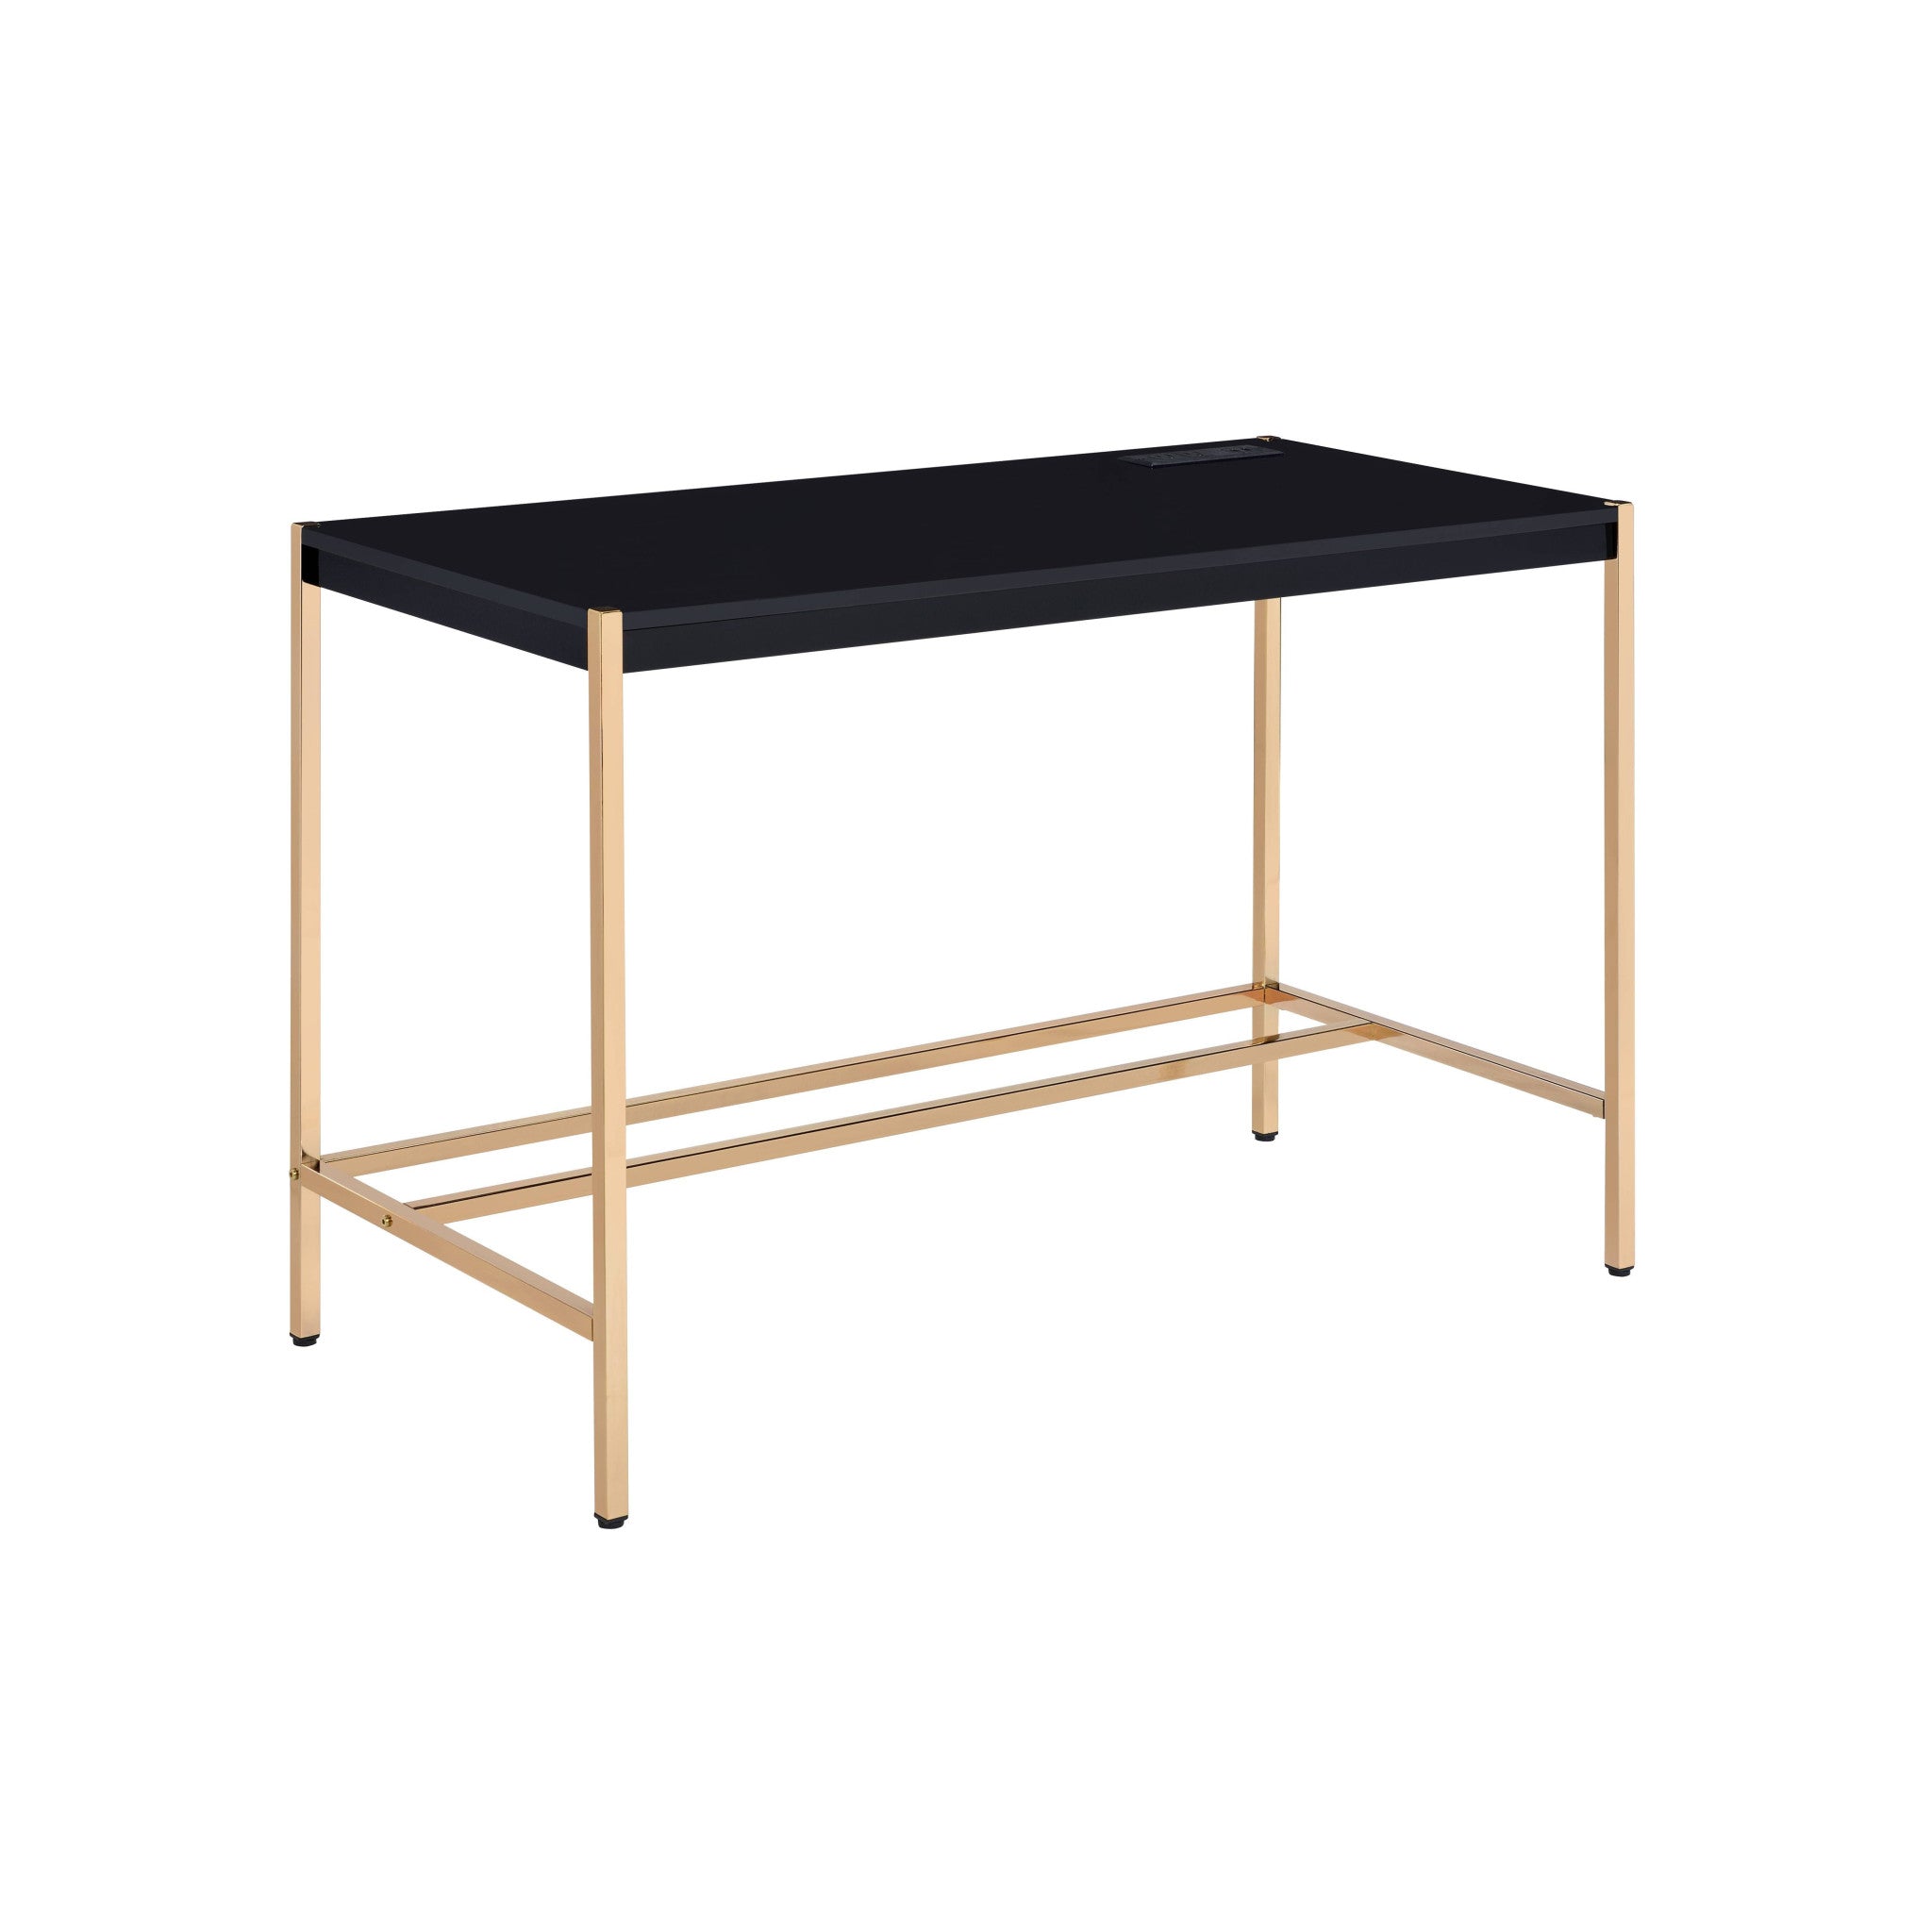 42" Black and Gold Writing Desk